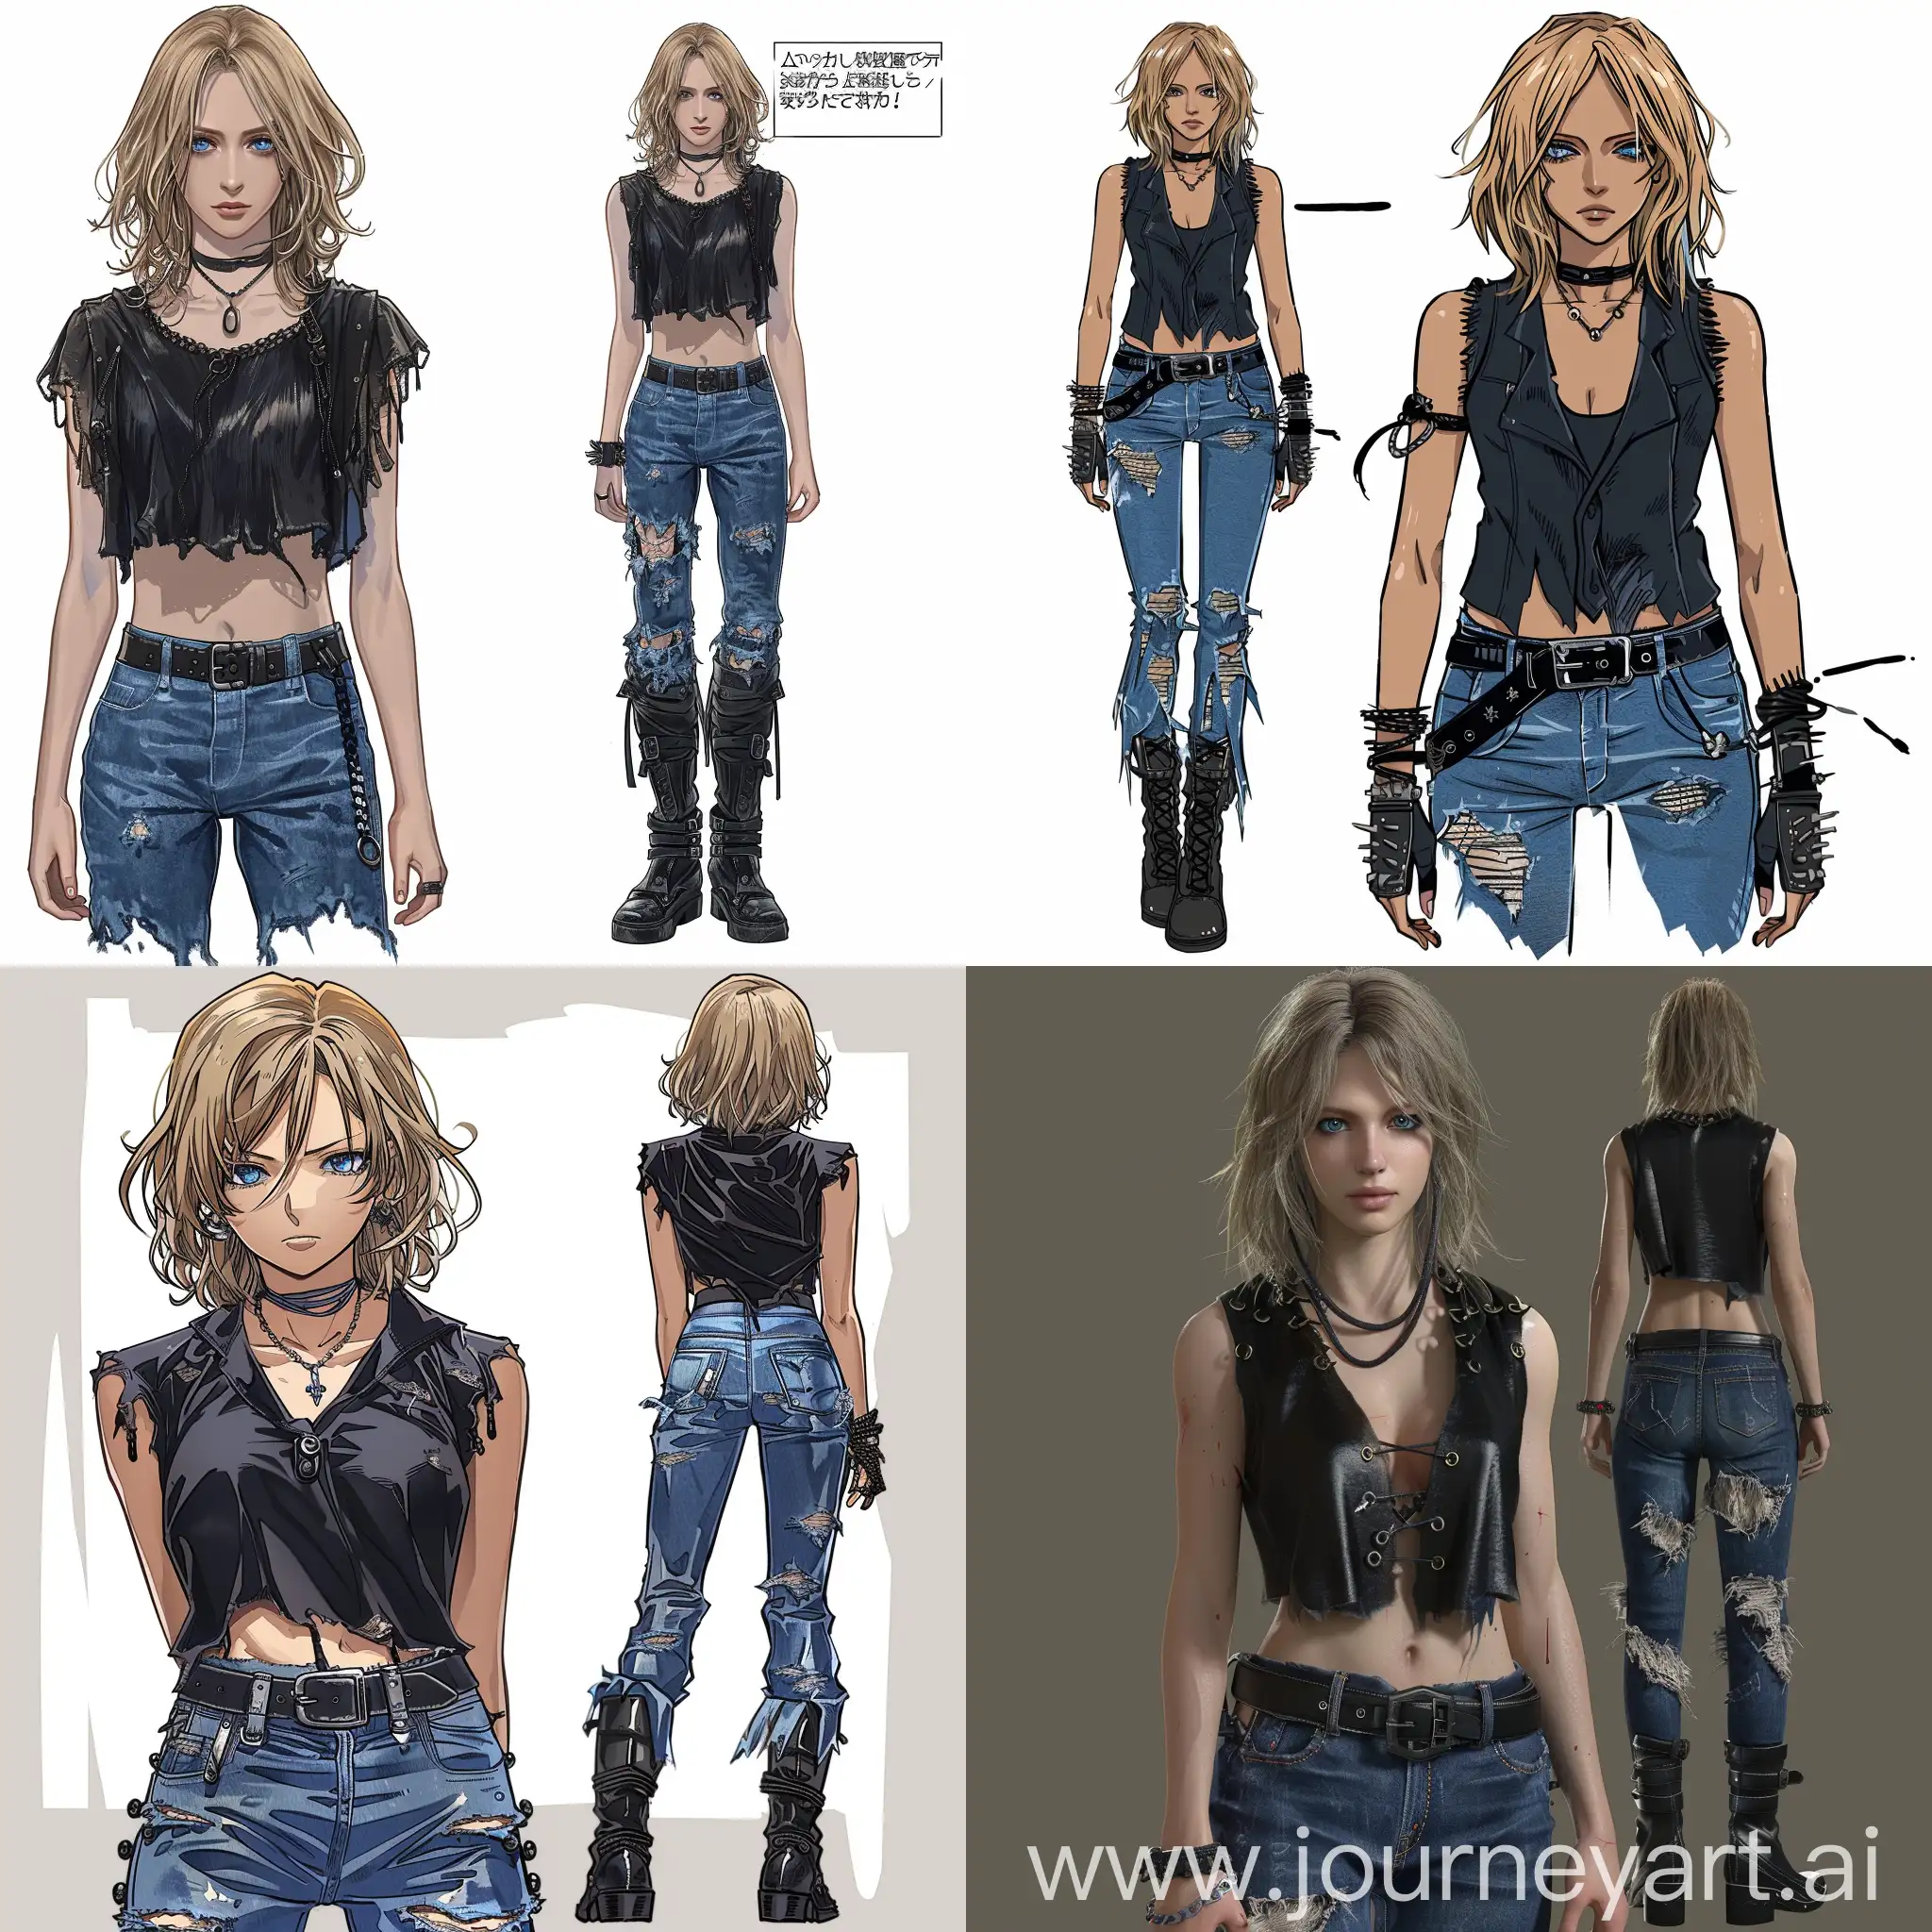 Aya Brea, She has shoulder-length blonde hair. The character's eyes are blue, giving her a sharp and focused gaze. She wears a dark black, sleeveless top with a subtle sheen, suggesting a silky or satin material, and features a series of decorative hooks down the center front. A thin, black cord necklace.Torn blue jeans along with buckled black boots that come just under her knees. The outfit includes a black belt.